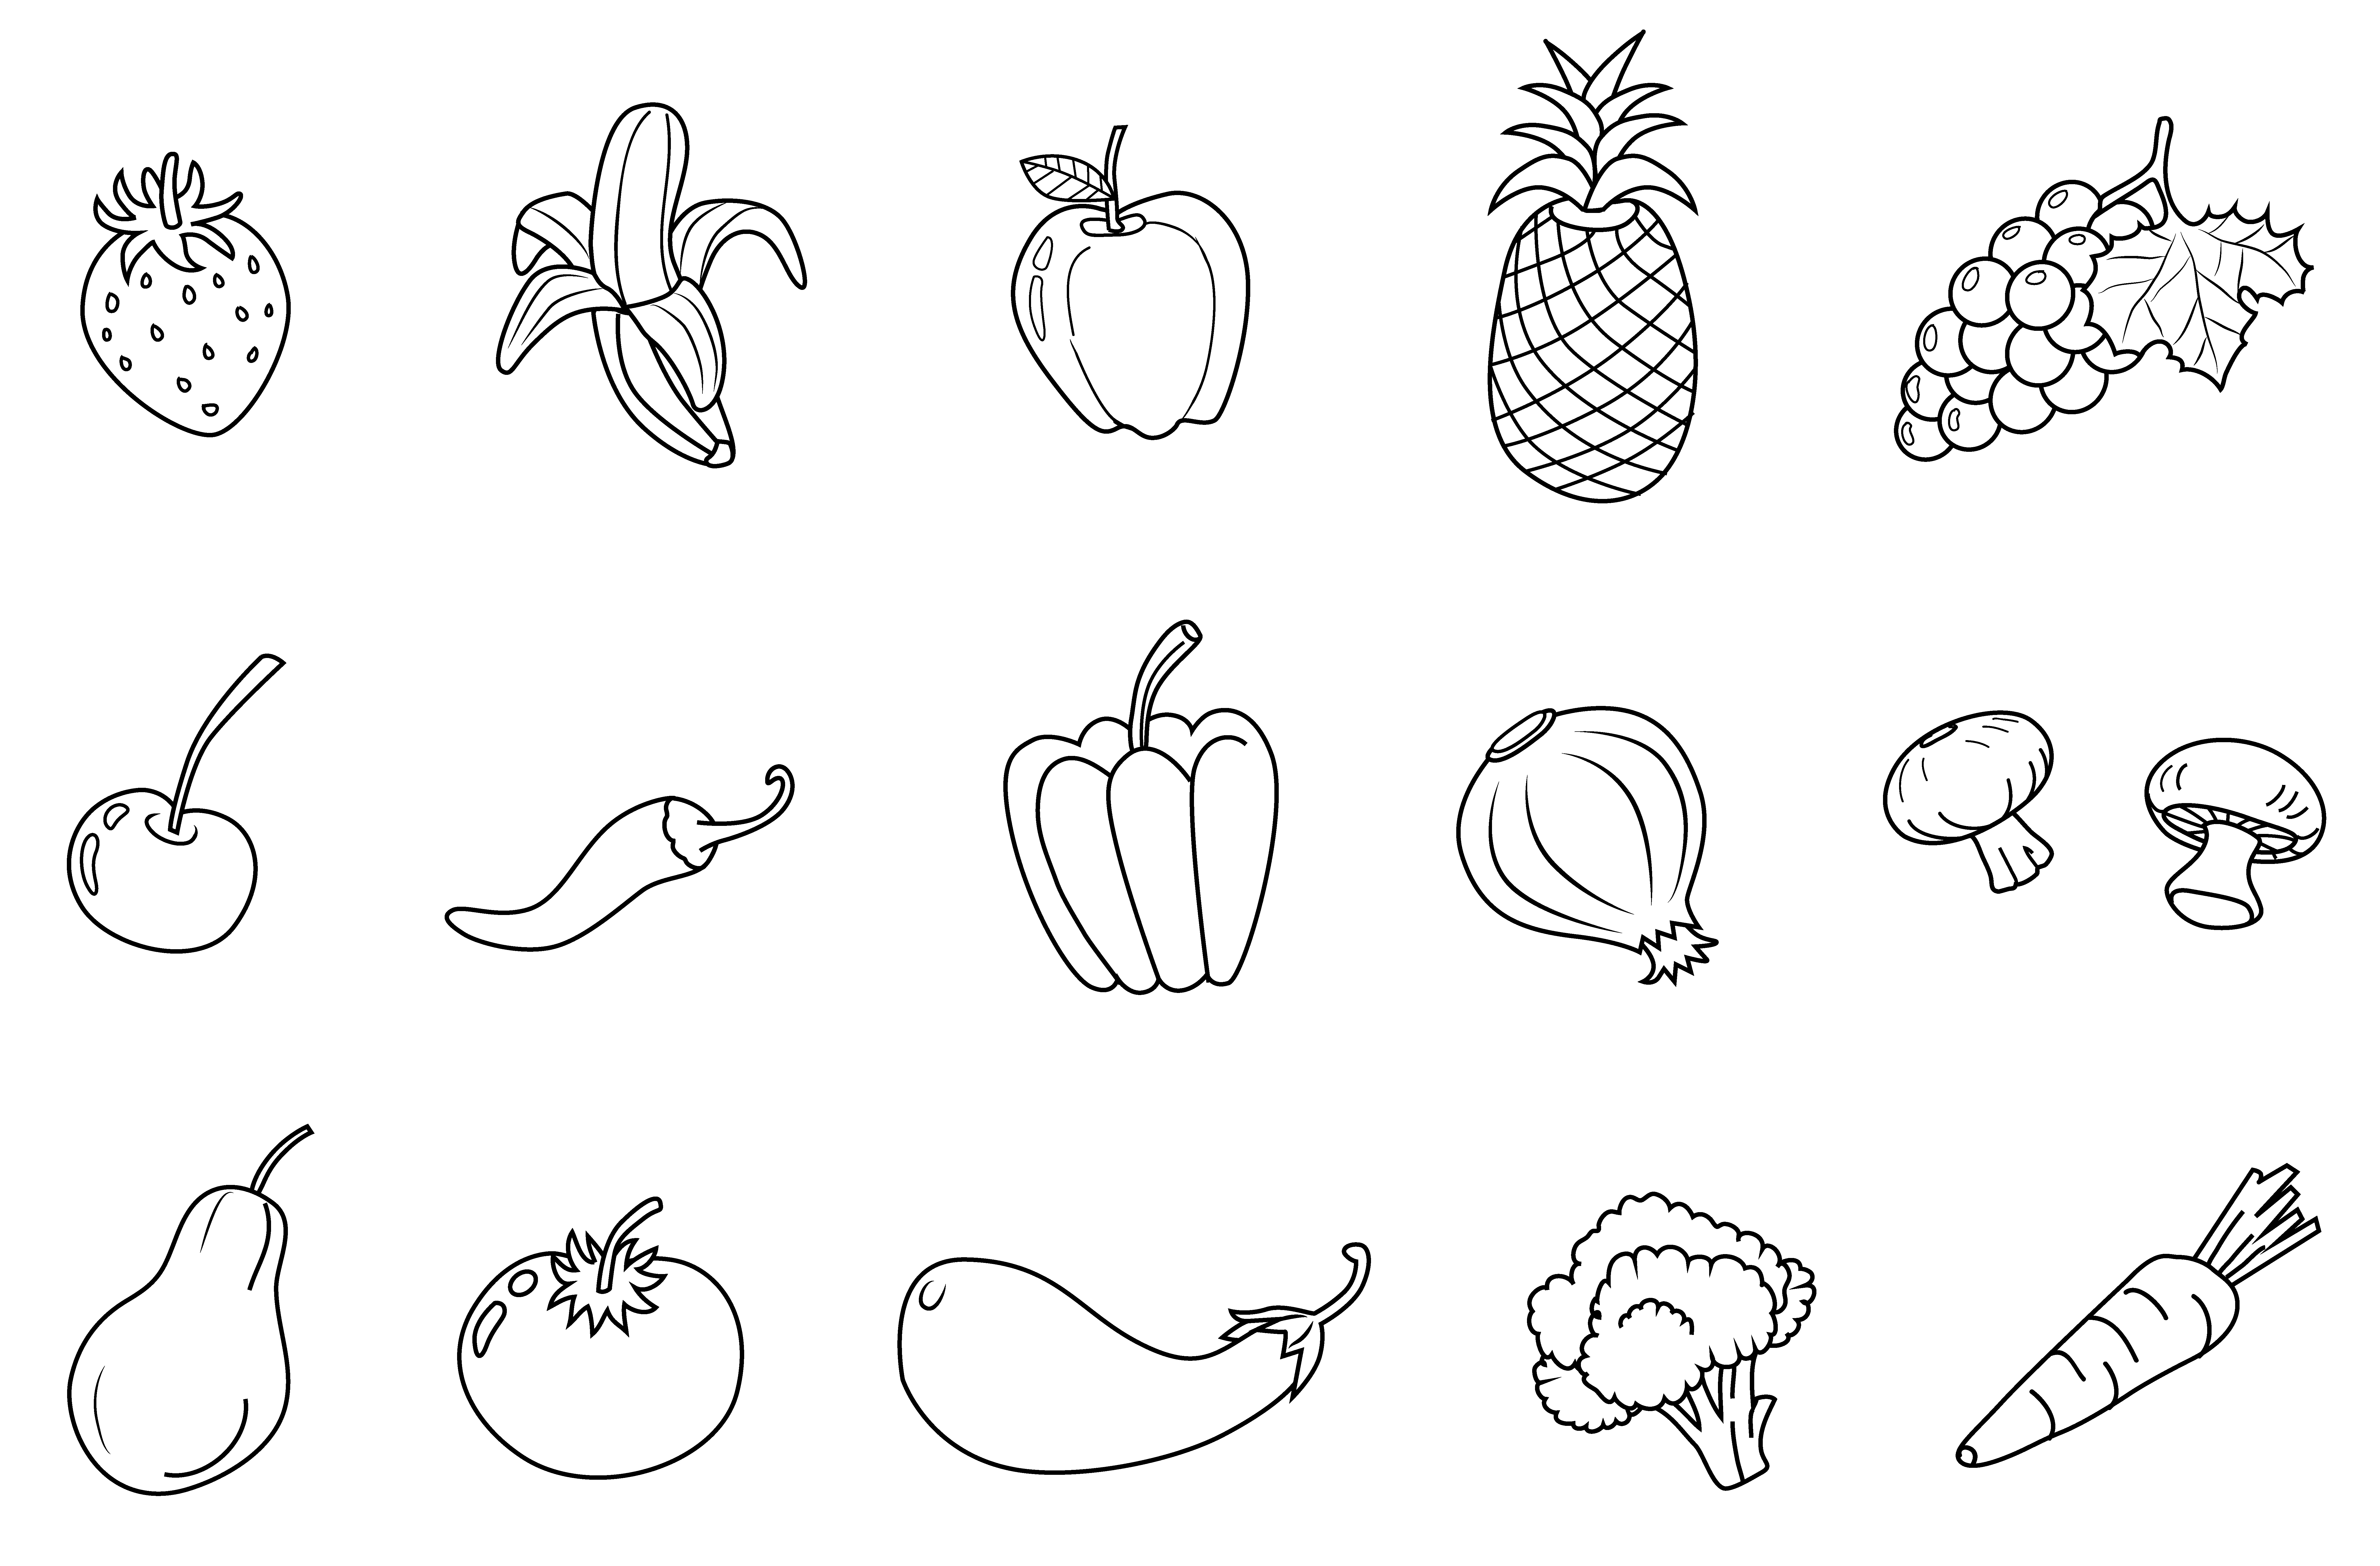 1208 Fruits And Vegetables free clipart.